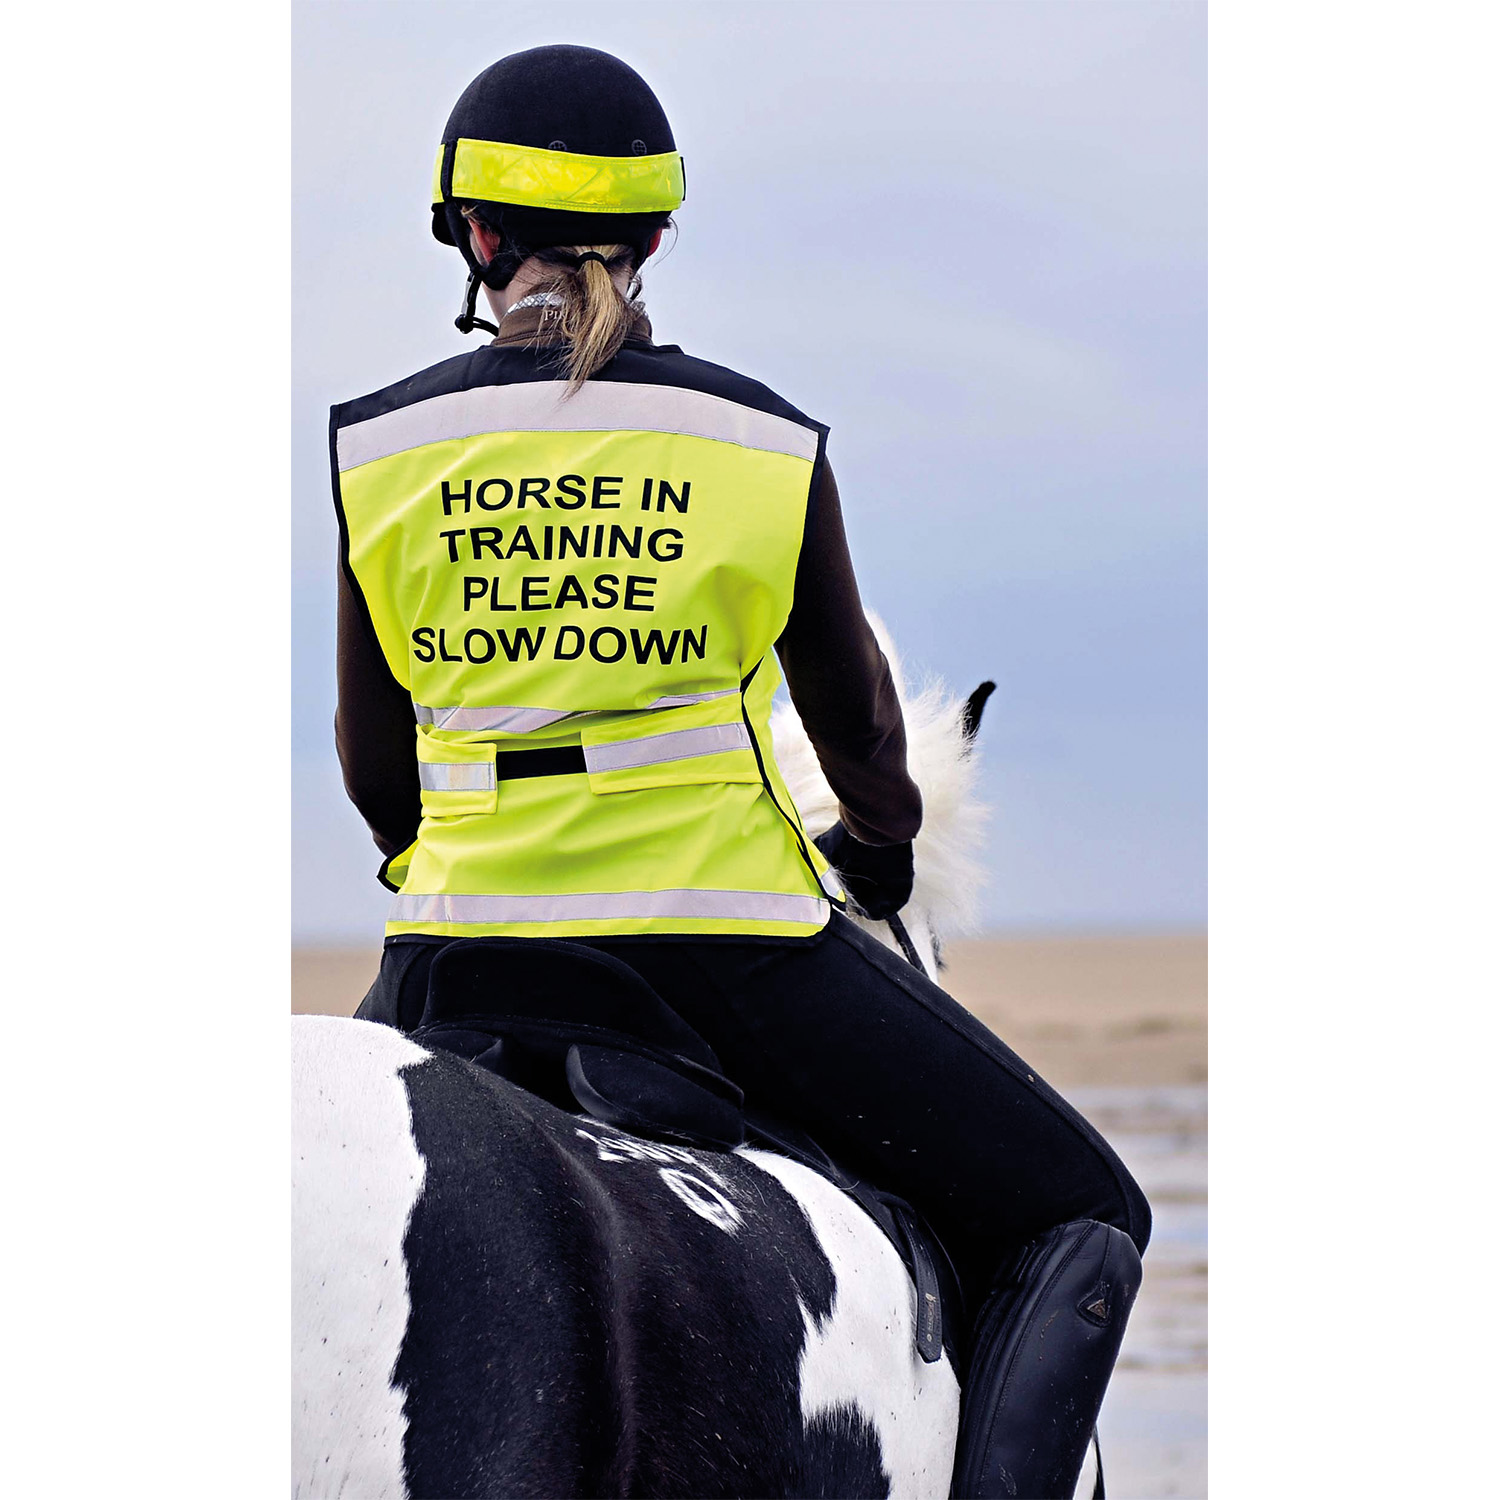 EQUISAFETY AIR WAISTCOAT HORSE IN TRAINING PLEASE SLOW DOWN CHILD / SMALL CHILD / SMALL